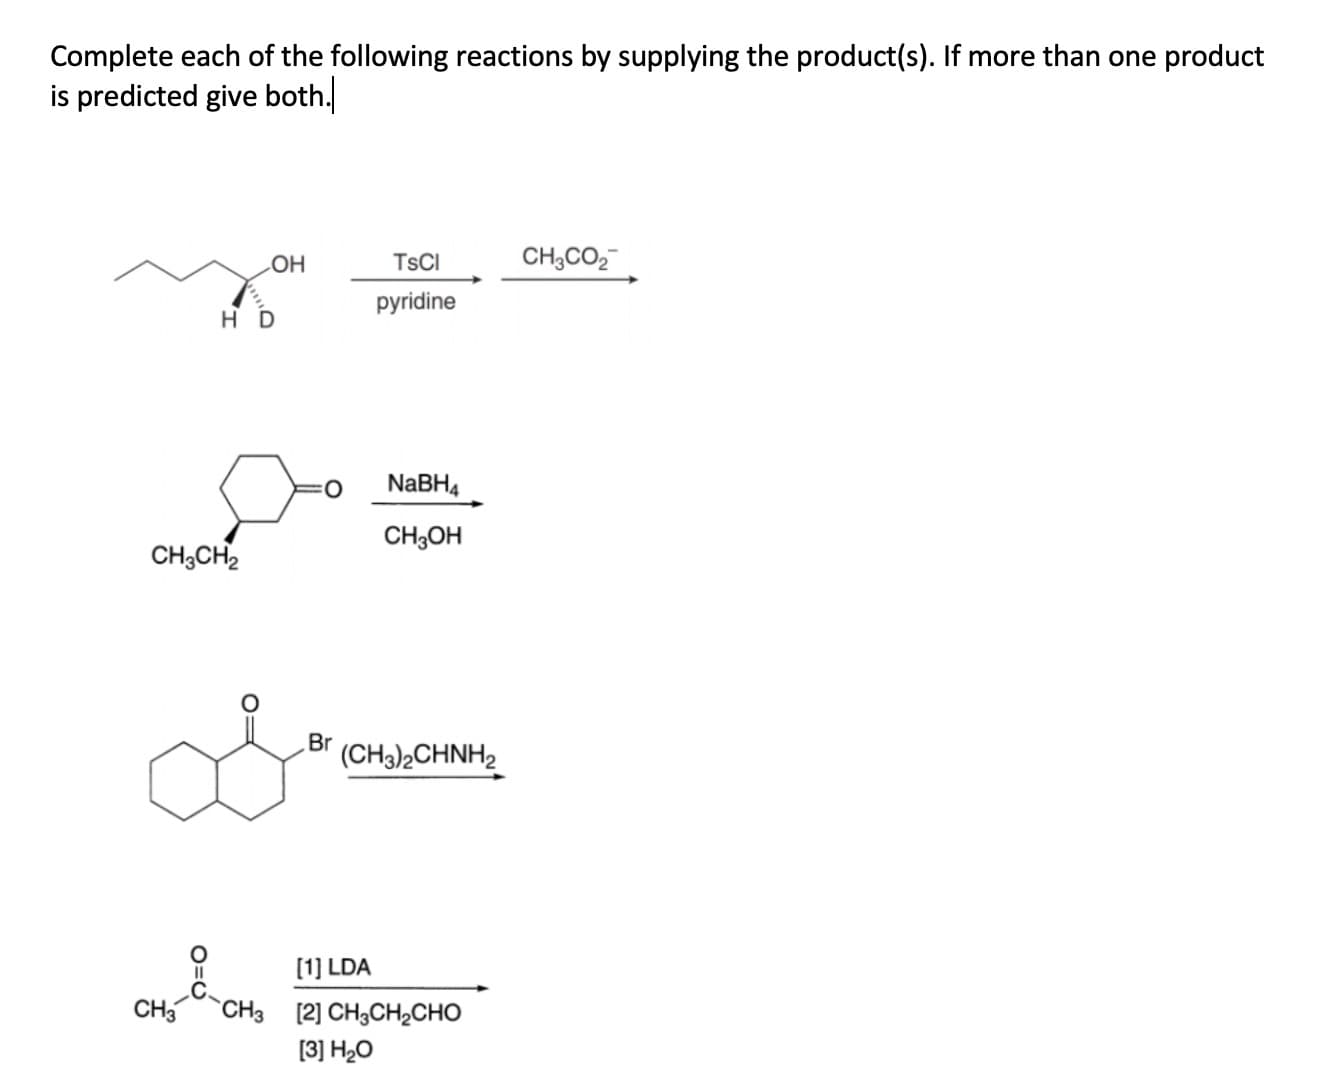 Complete each of the following reactions by supplying the product(s). If more than one product
is predicted give both.
TSCI
CH,CO,
HO
pyridine
H D
NABH4
CH;OH
CH;CH2
Br
(CH3)2CHNH2
